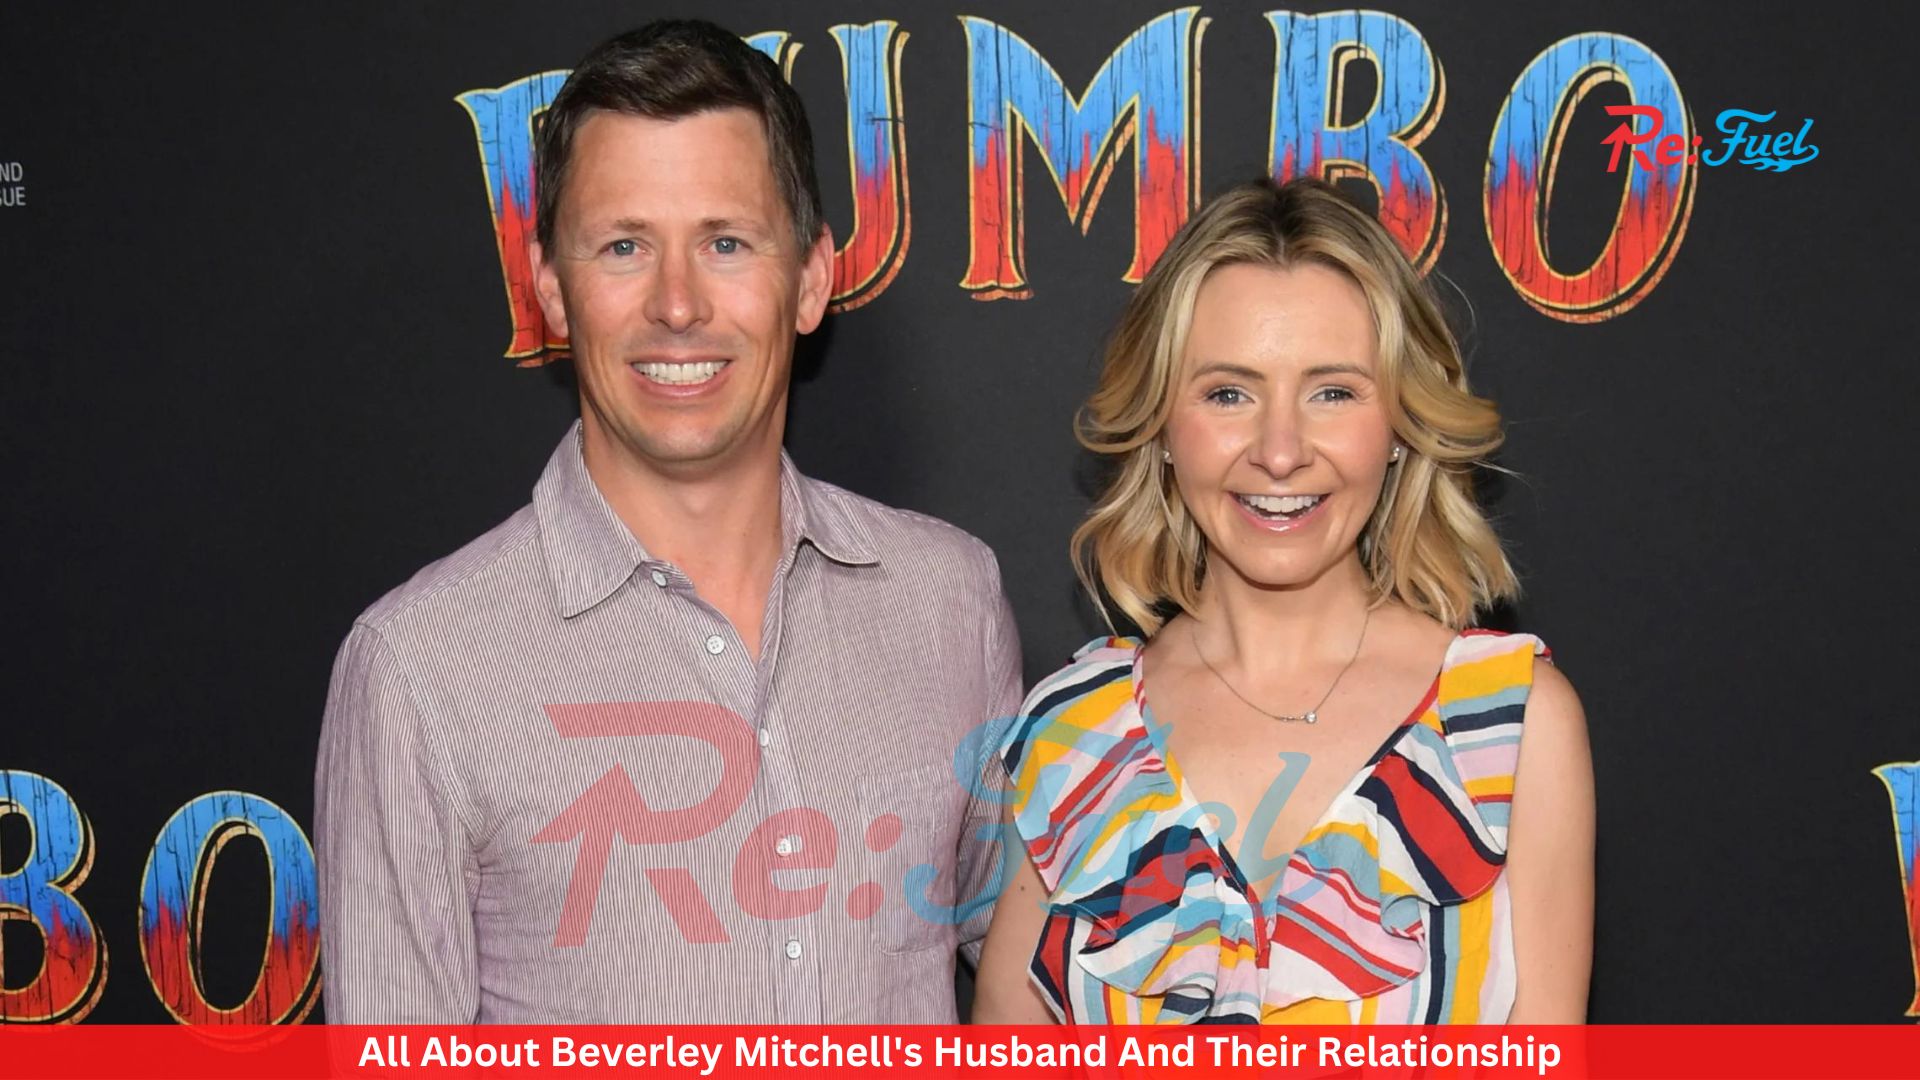 All About Beverley Mitchell's Husband And Their Relationship